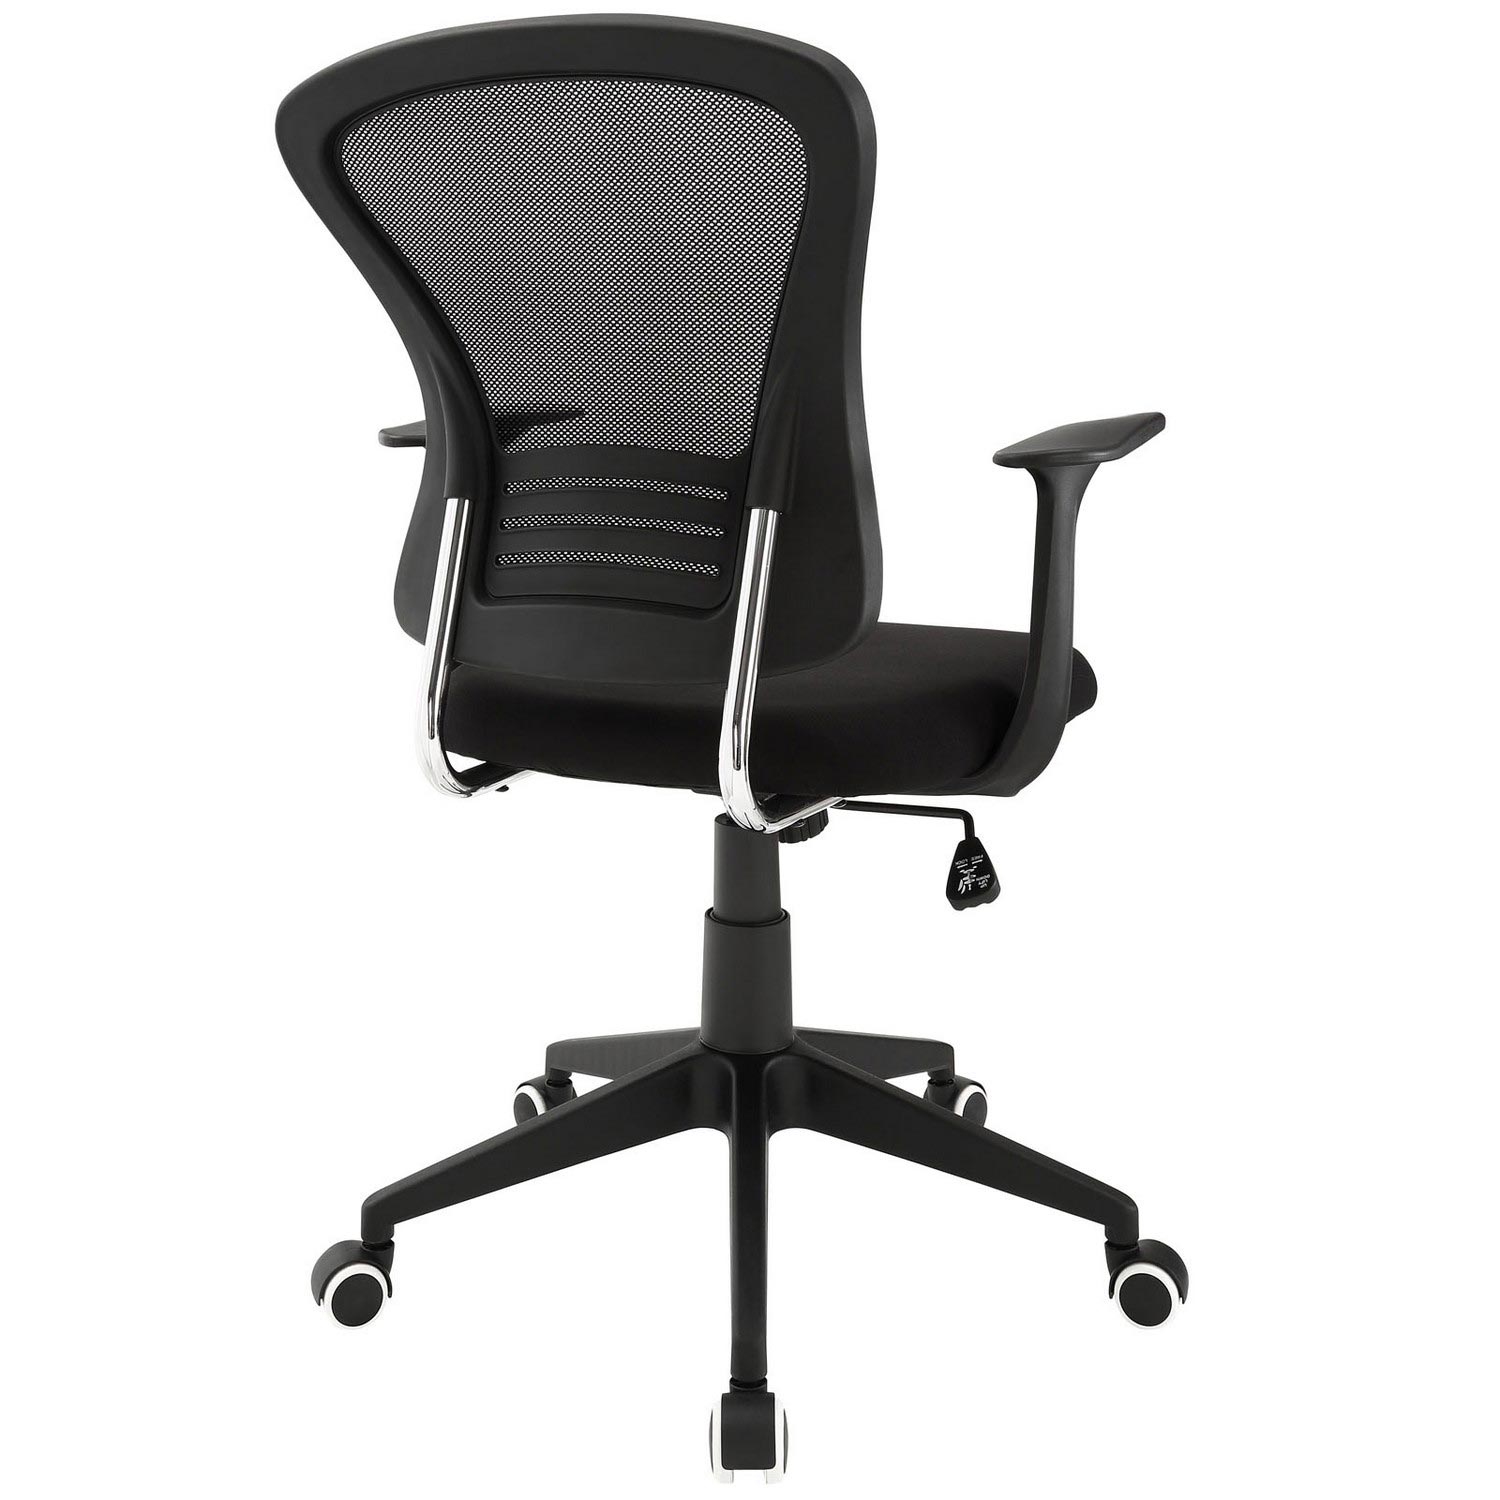 Modway Poise Office Chair - Black